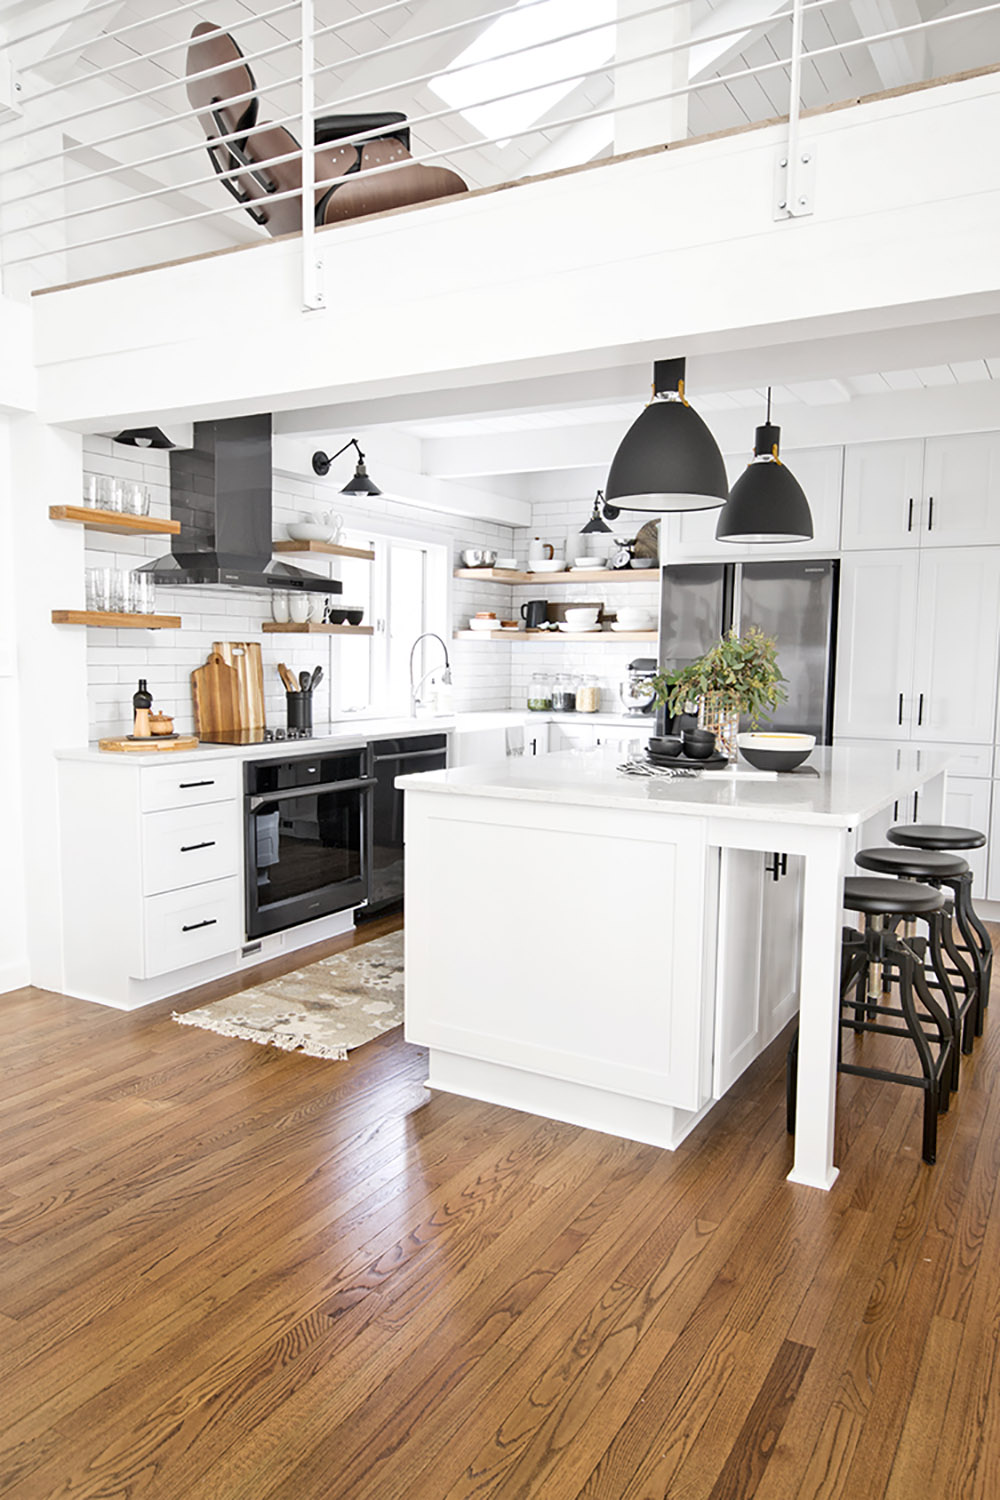 An updated kitchen with black appliances, open shelving, and white cabinets.